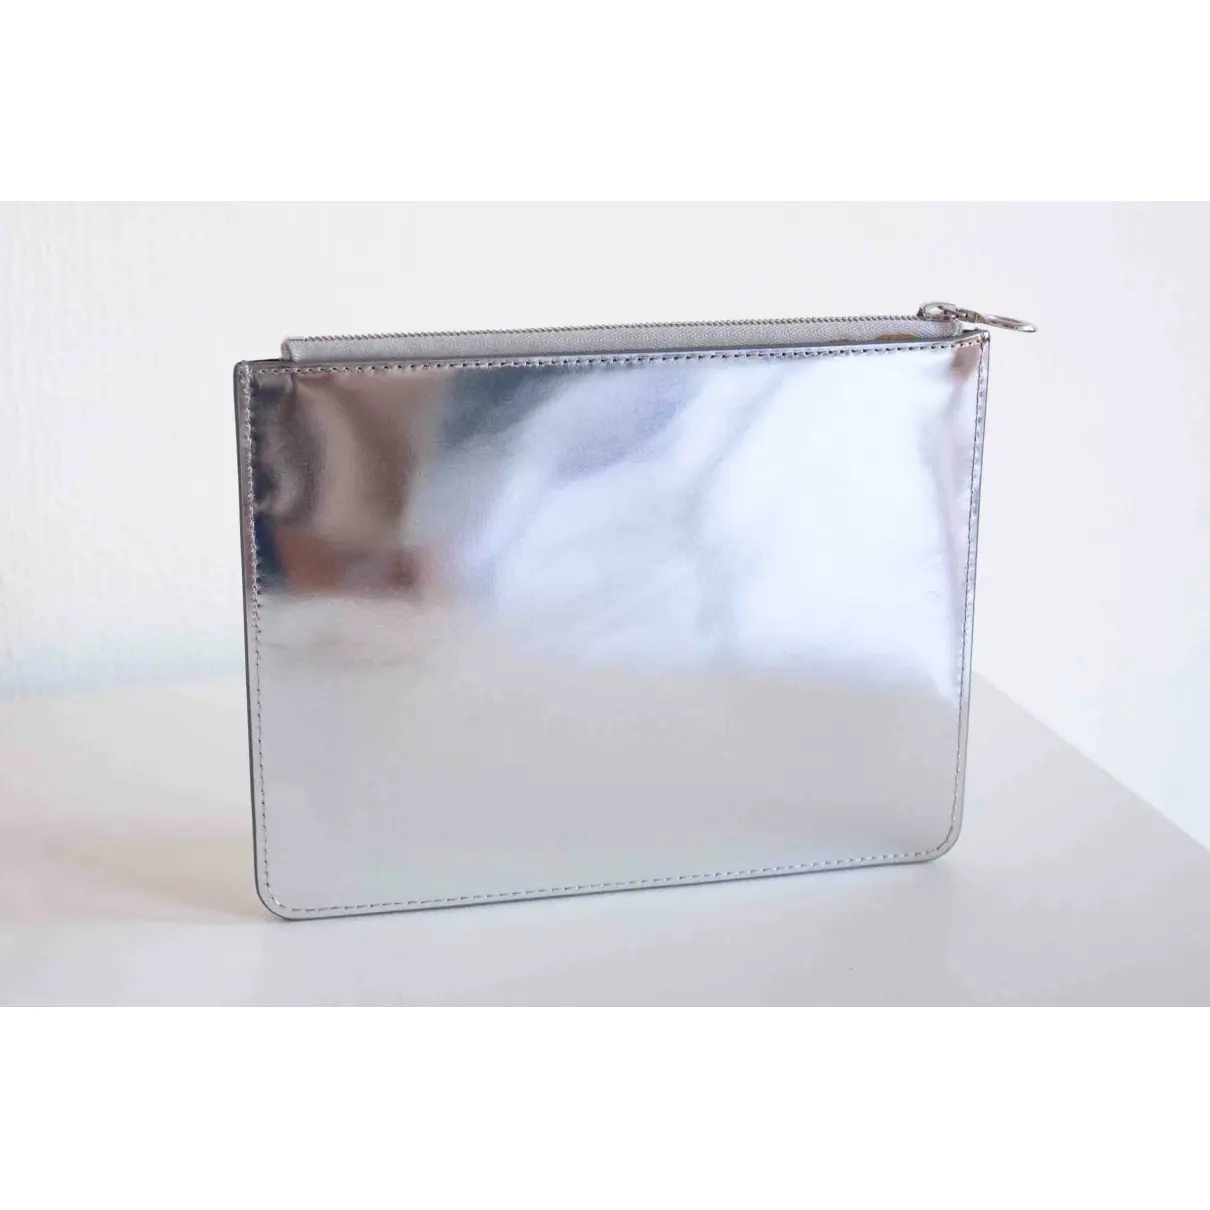 Kara Patent leather clutch bag for sale